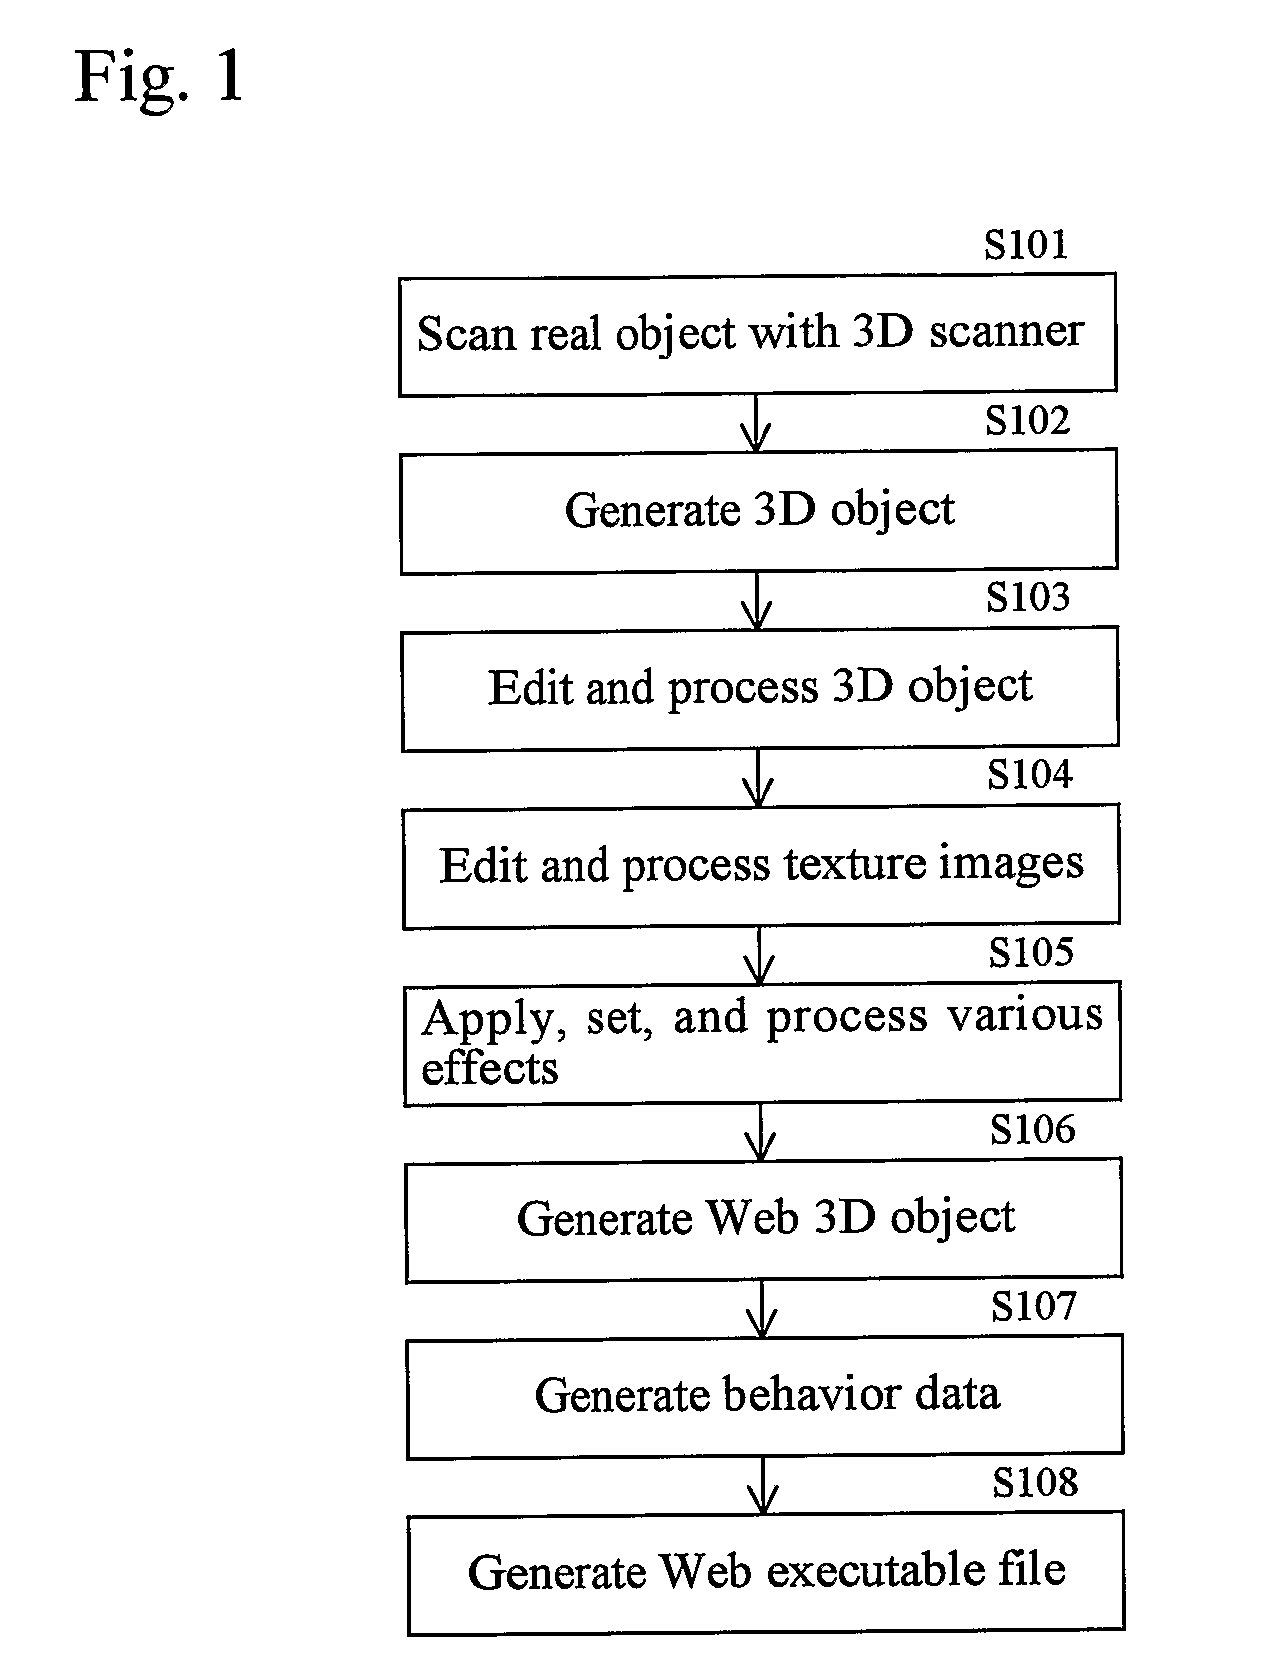 3D Image Generation and Display System